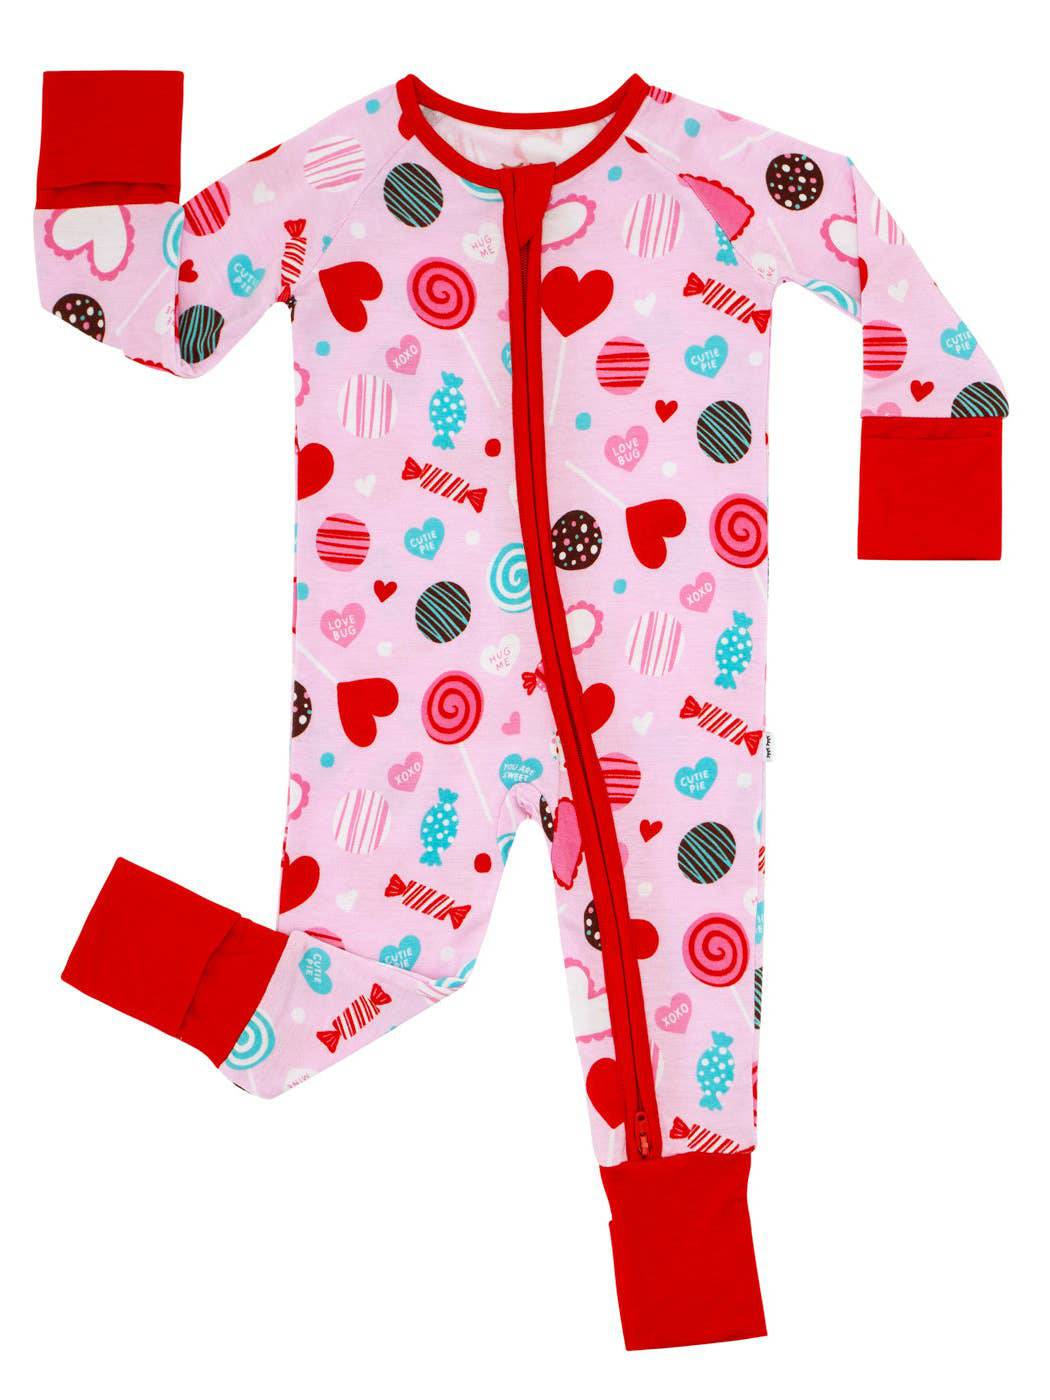 Little Sleepies: Get Reviewed-approved pajamas for under $30